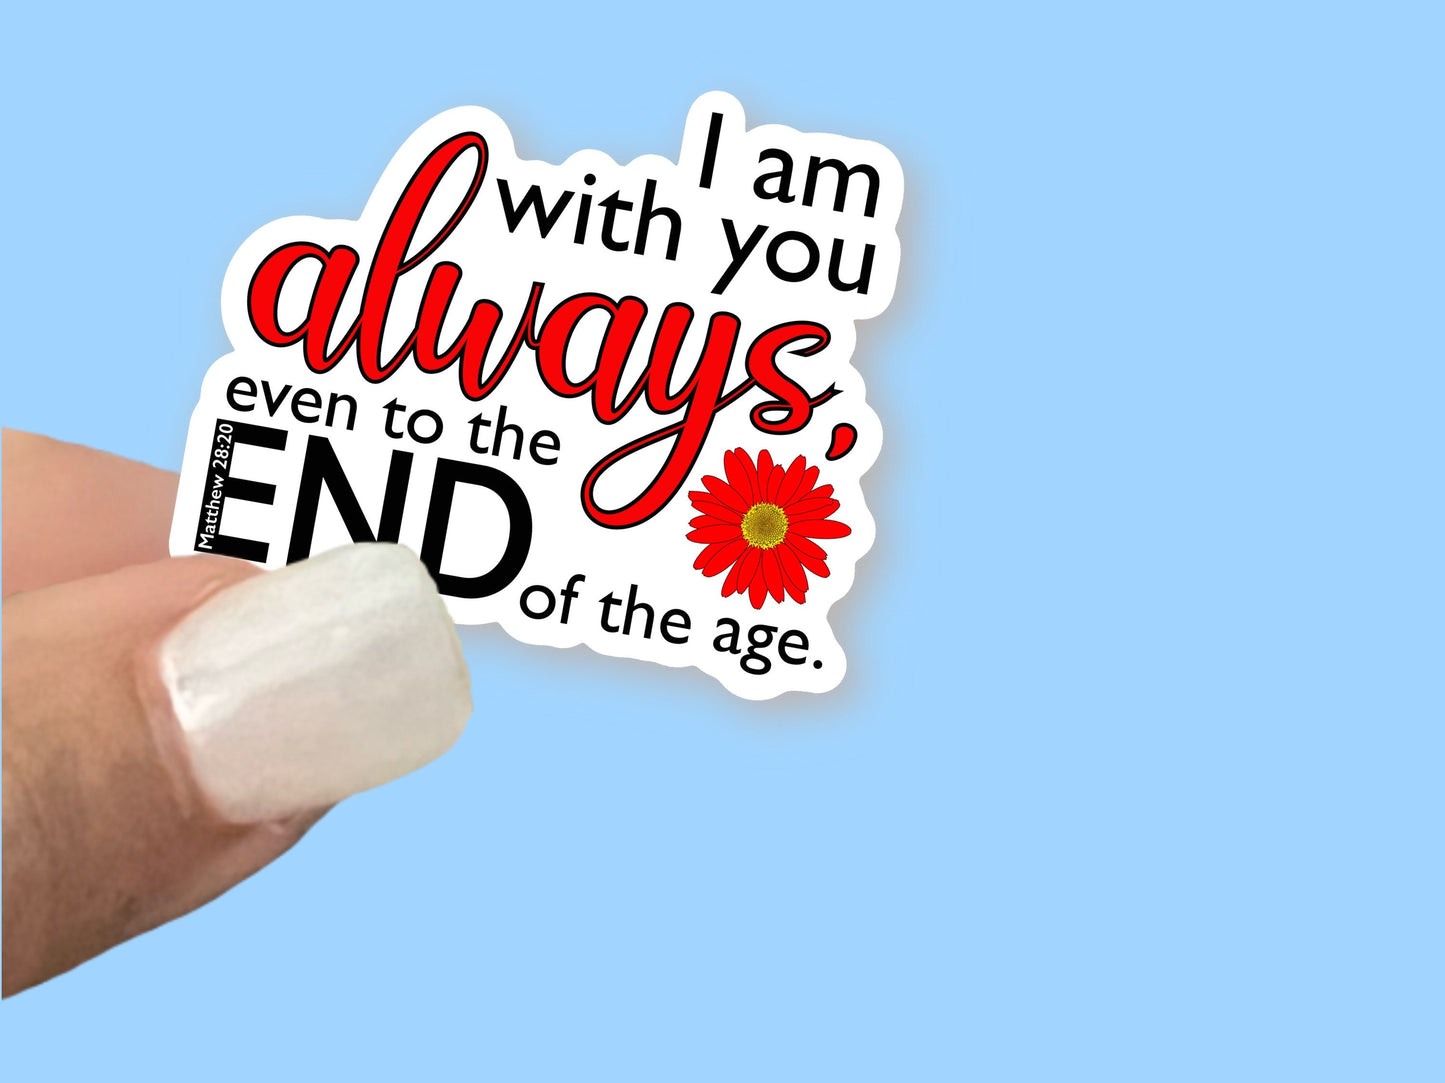 I am always with you, even to the end of the age - Christian Faith UV/ Waterproof Vinyl Sticker/ Decal- Choice of Size, Single or Bulk qty